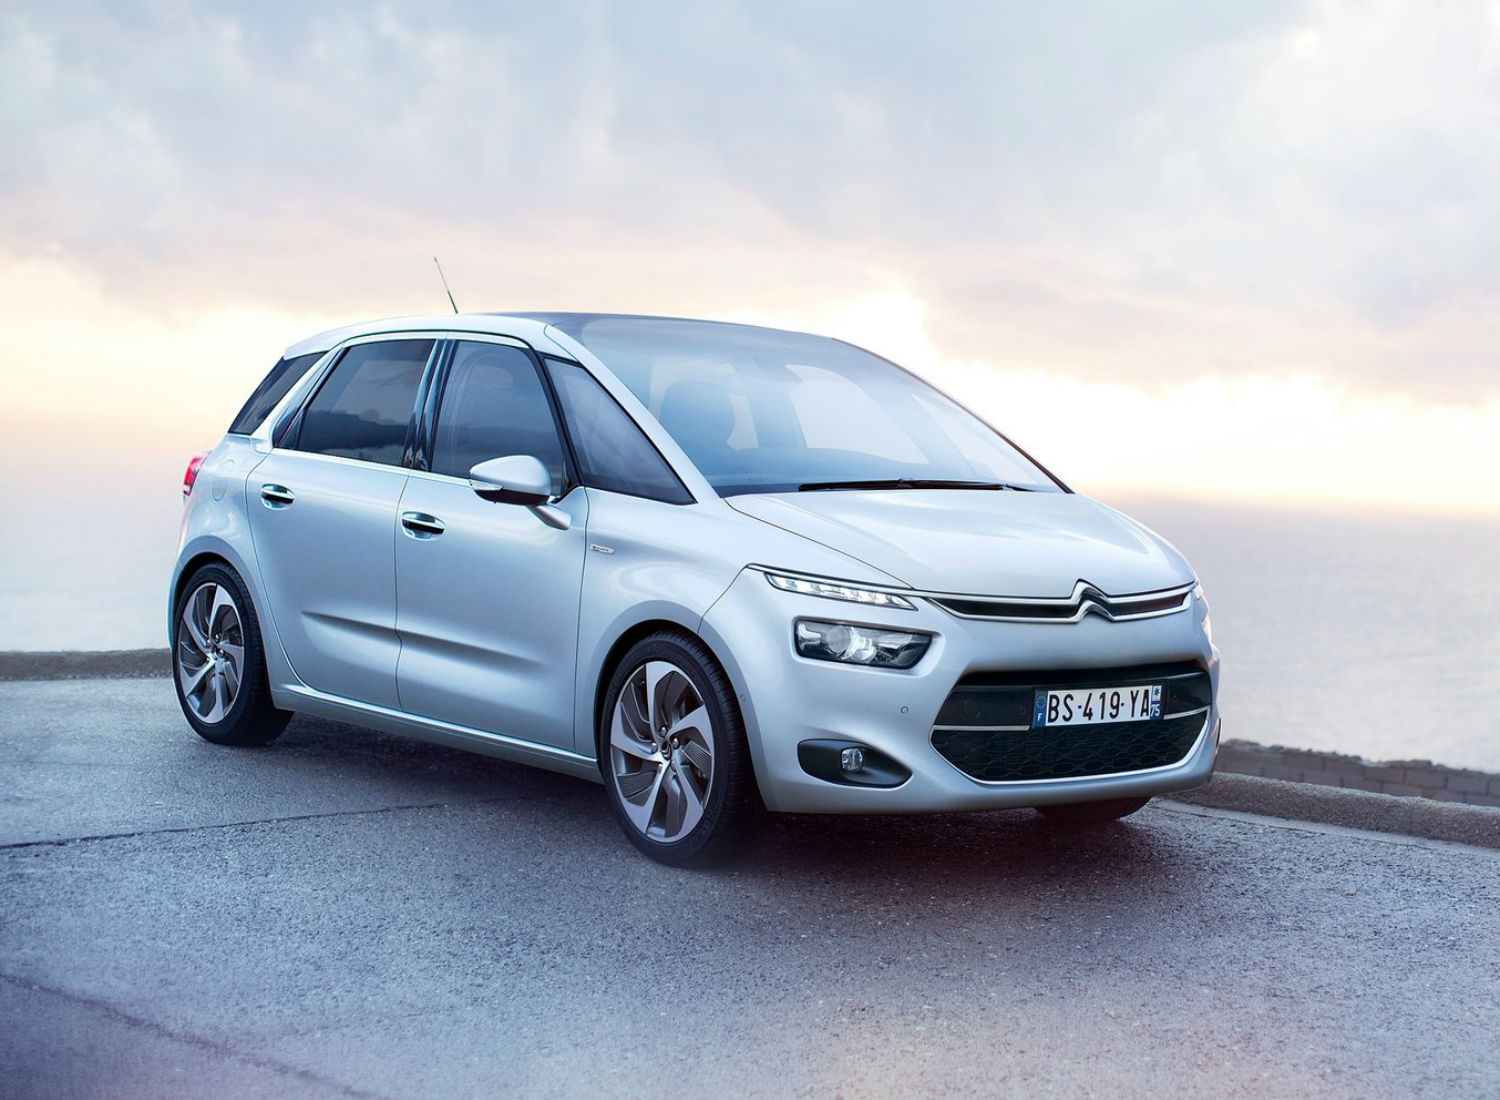 Coches para mujeres - Citroen C4 Picasso